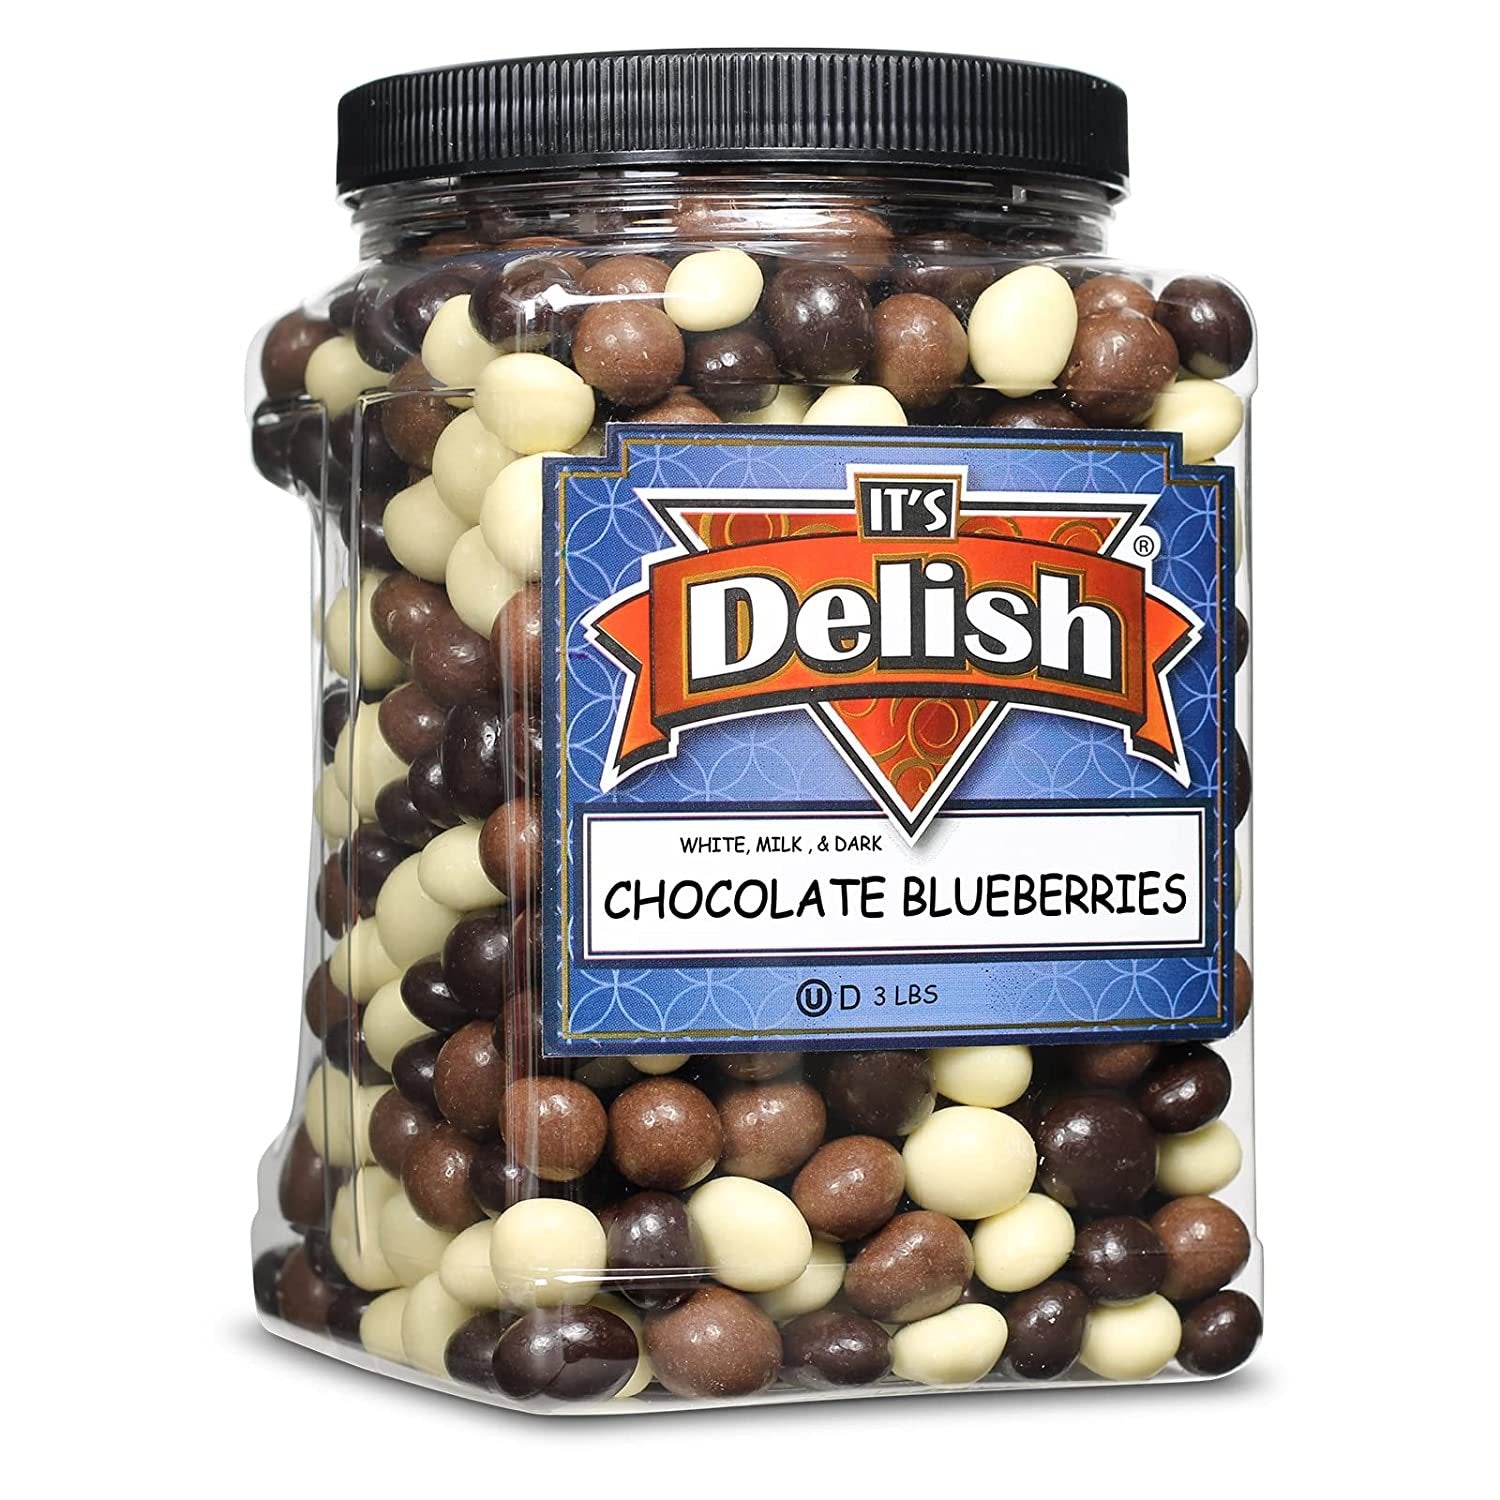 Gourmet Dark Chocolate Covered Blueberries - by It's Delish, 3 LBS